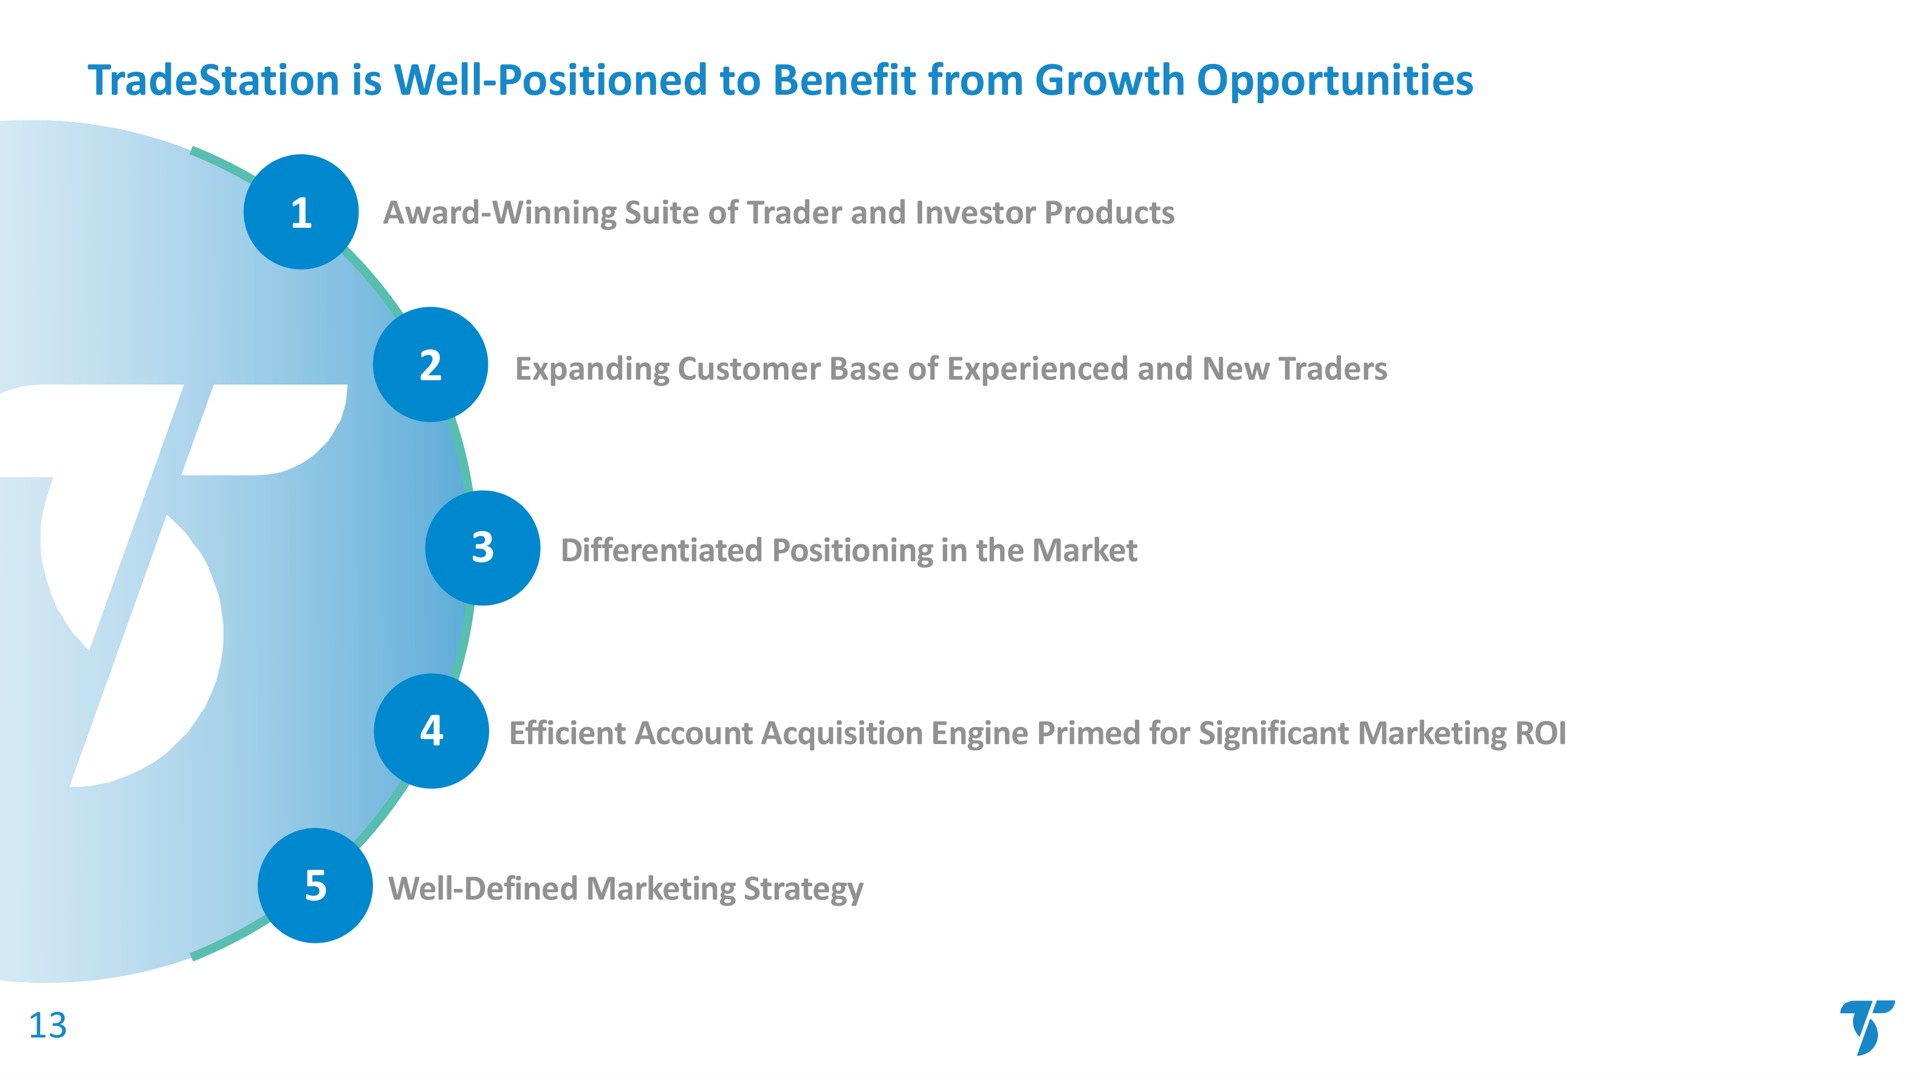 is well positioned to benefit from growth opportunities award winning suite of trader and investor products expanding customer base of experienced and new traders differentiated positioning in the market efficient account acquisition engine primed for significant marketing roi well defined marketing strategy | TradeStation